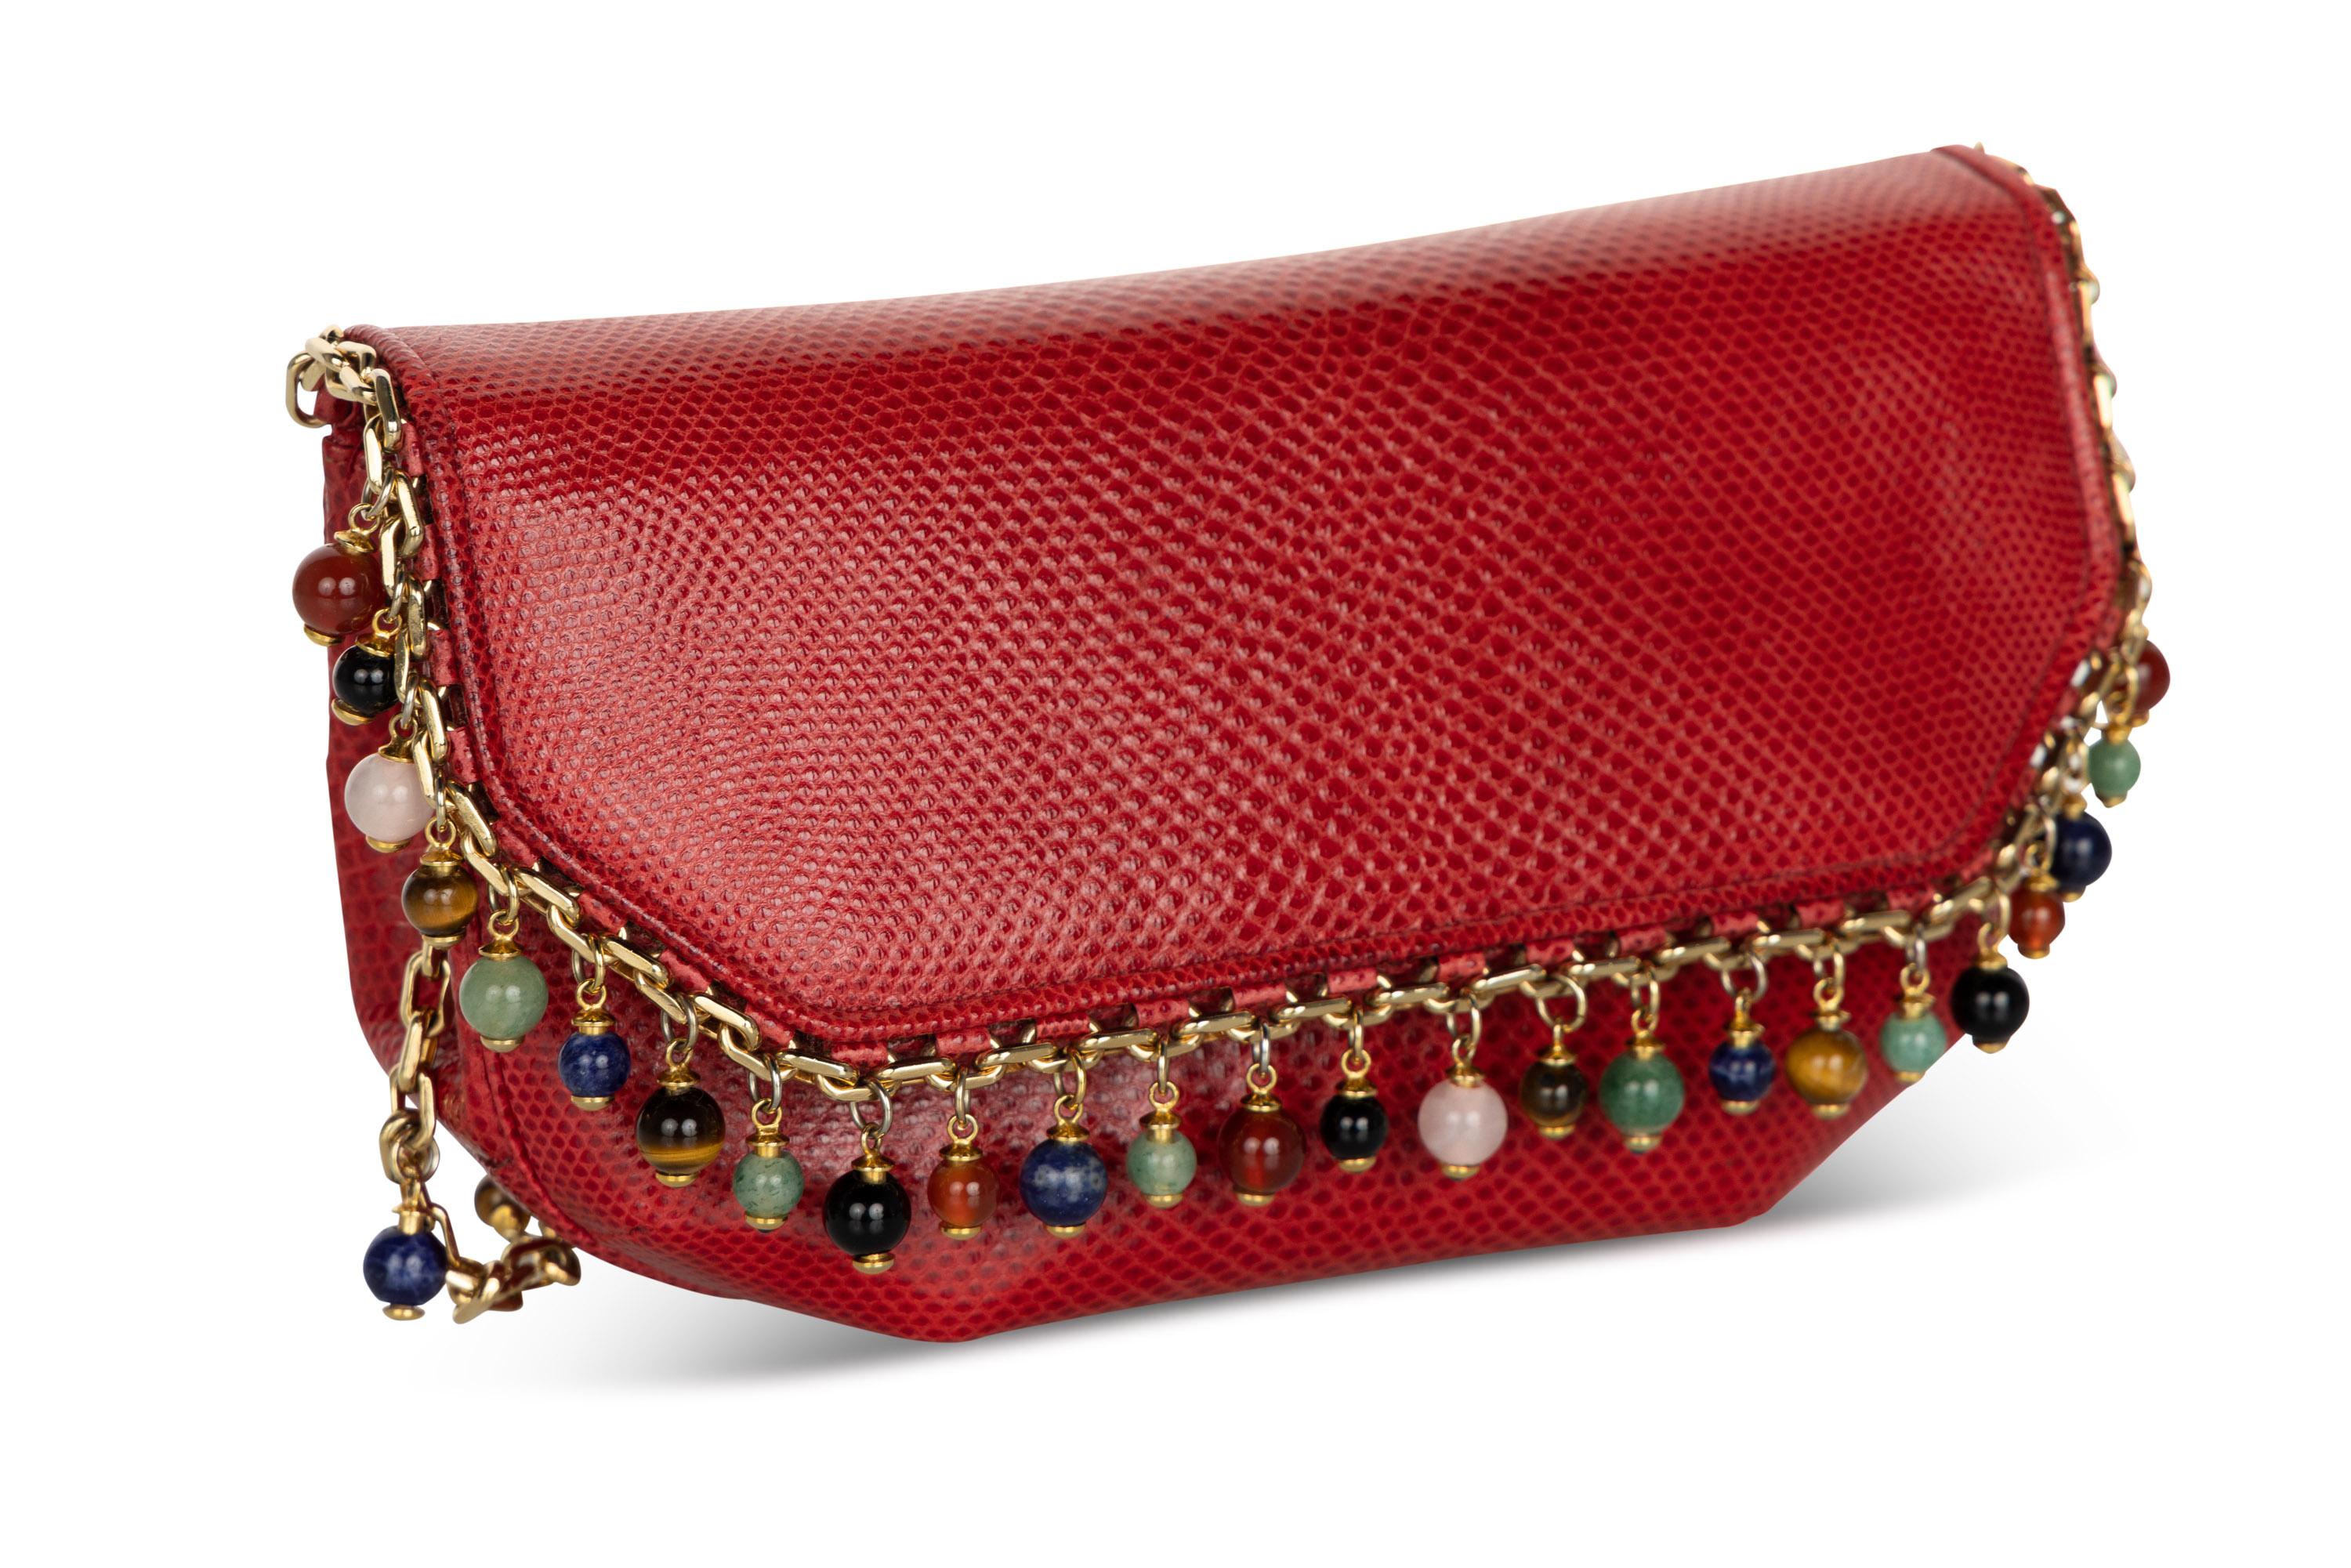 Judith Leiber Red Karung  Semiprecious Stones Gold Chain Bag Clutch In Excellent Condition For Sale In Boca Raton, FL